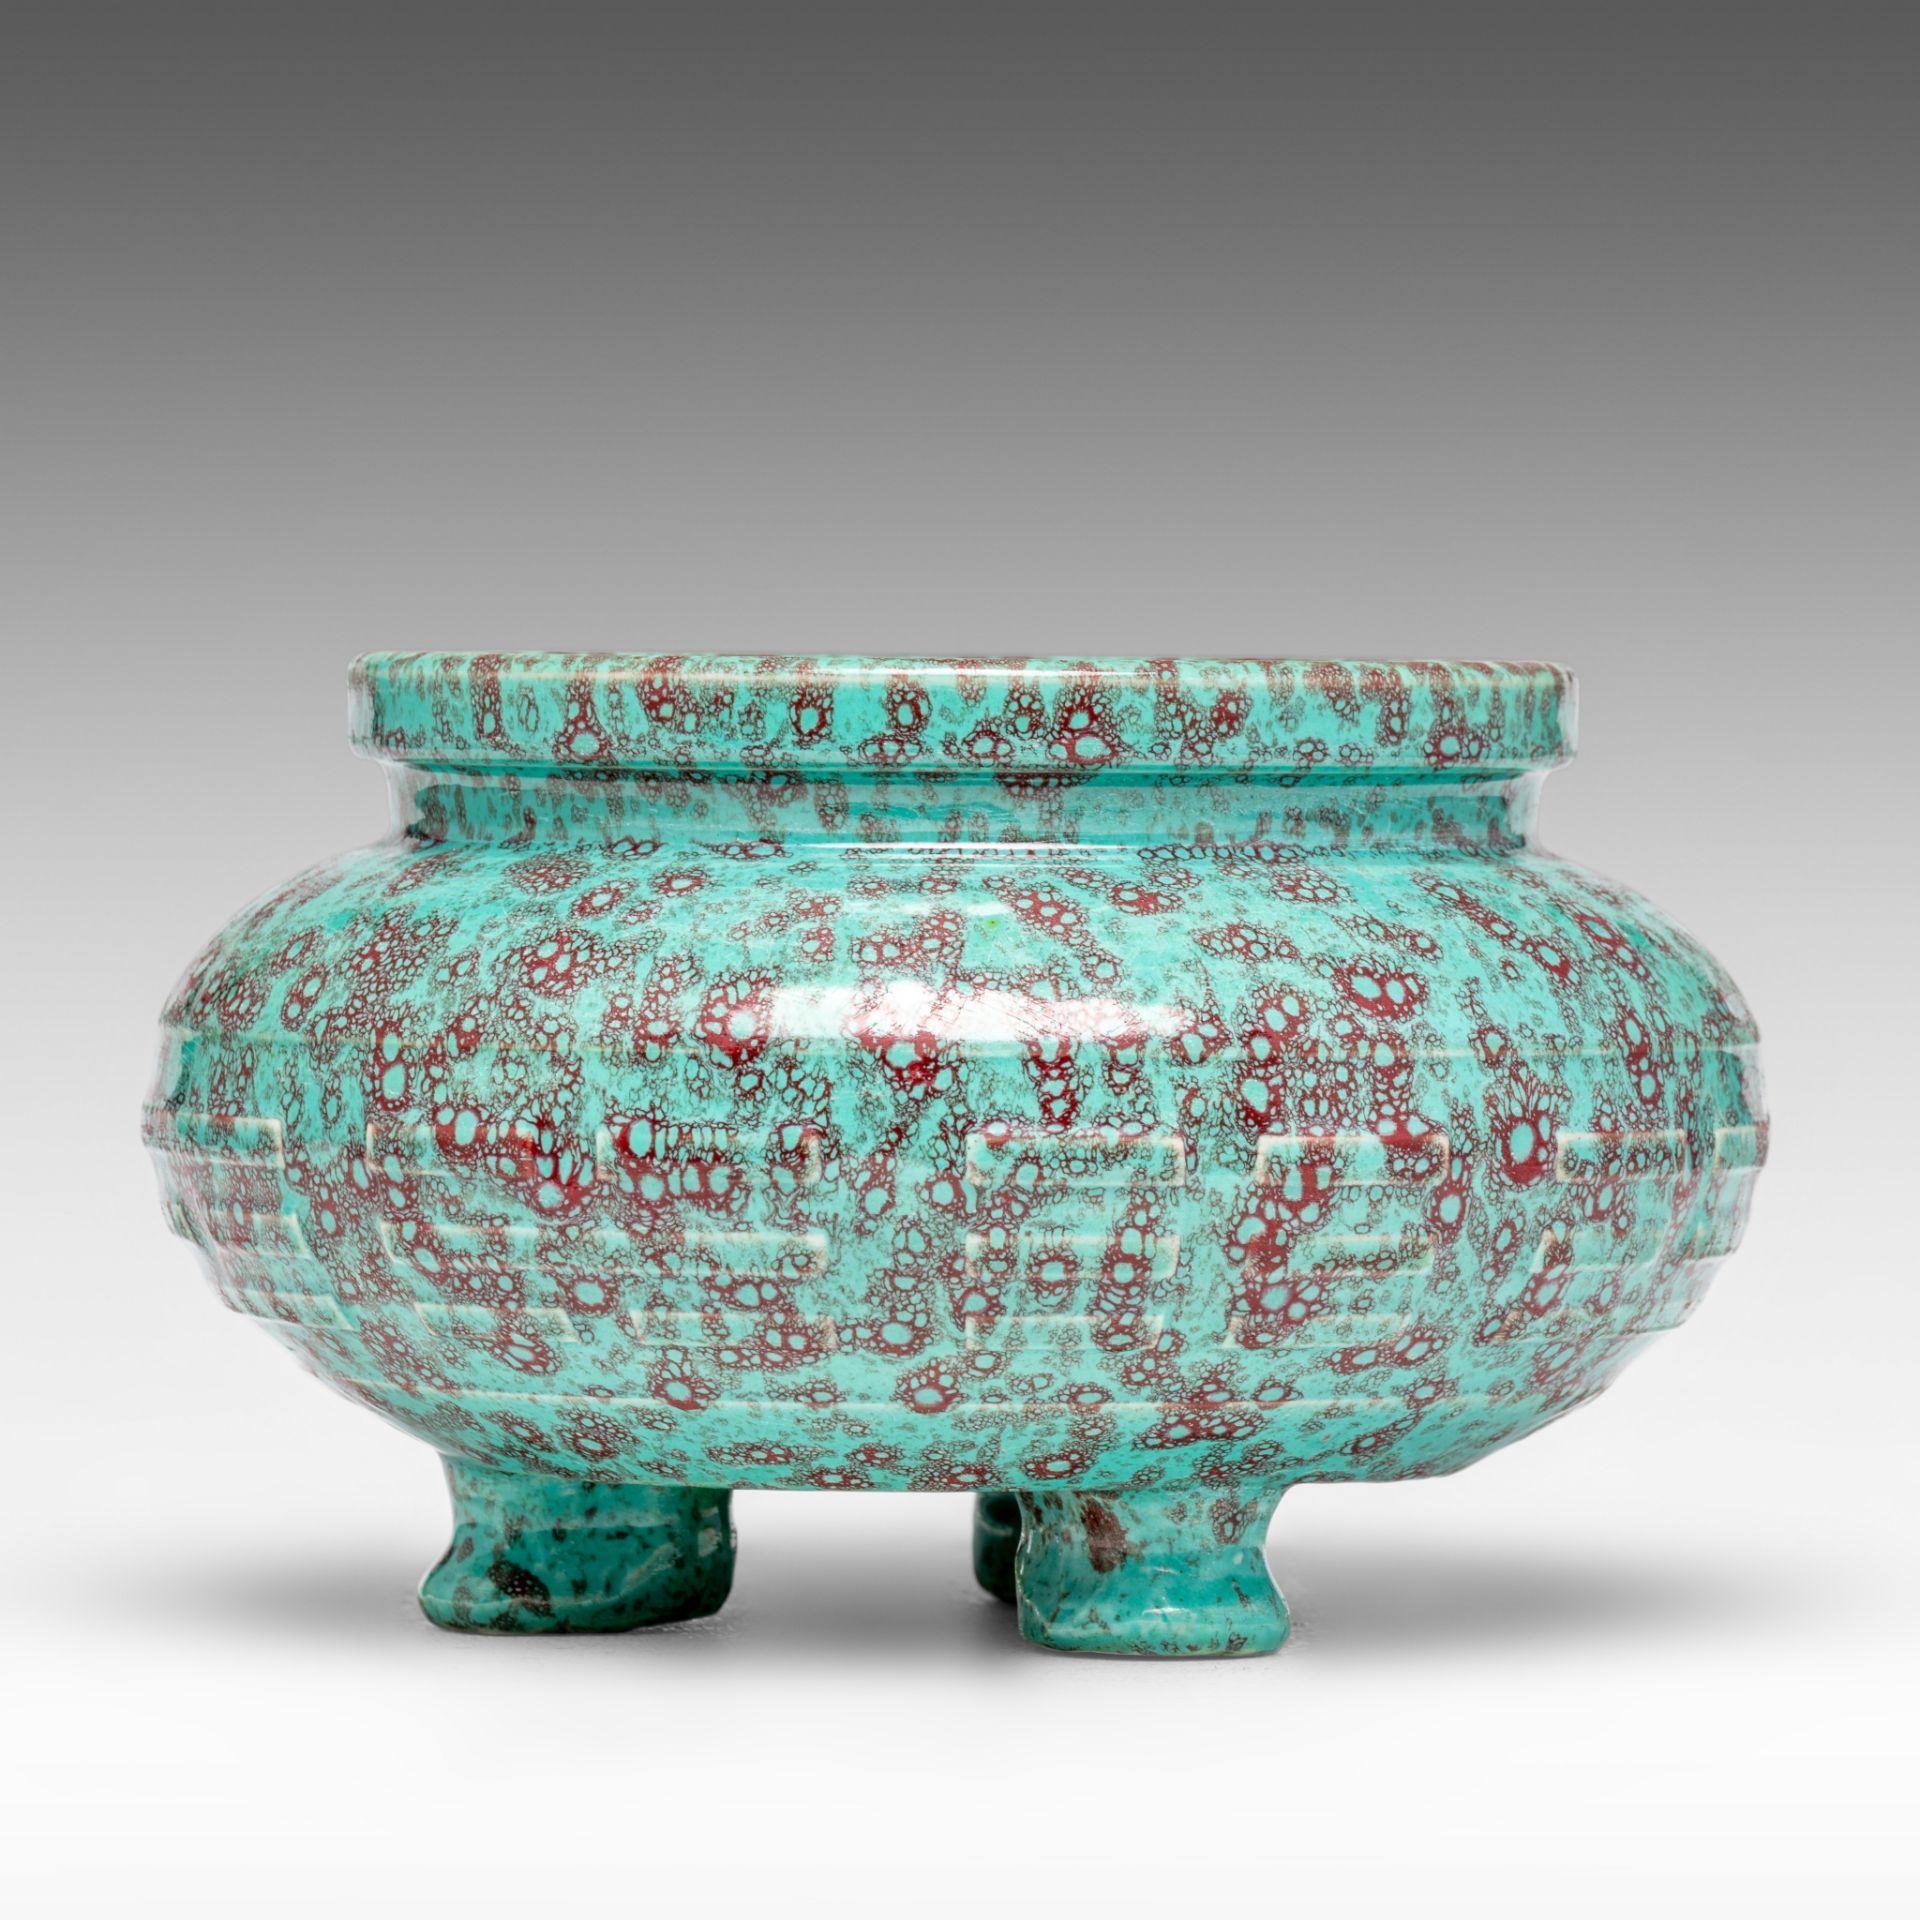 A rare Chinese 'peacock-feather'-glazed Bagua tripod censer, with a Qianlong impressed mark, presuma - Image 3 of 6